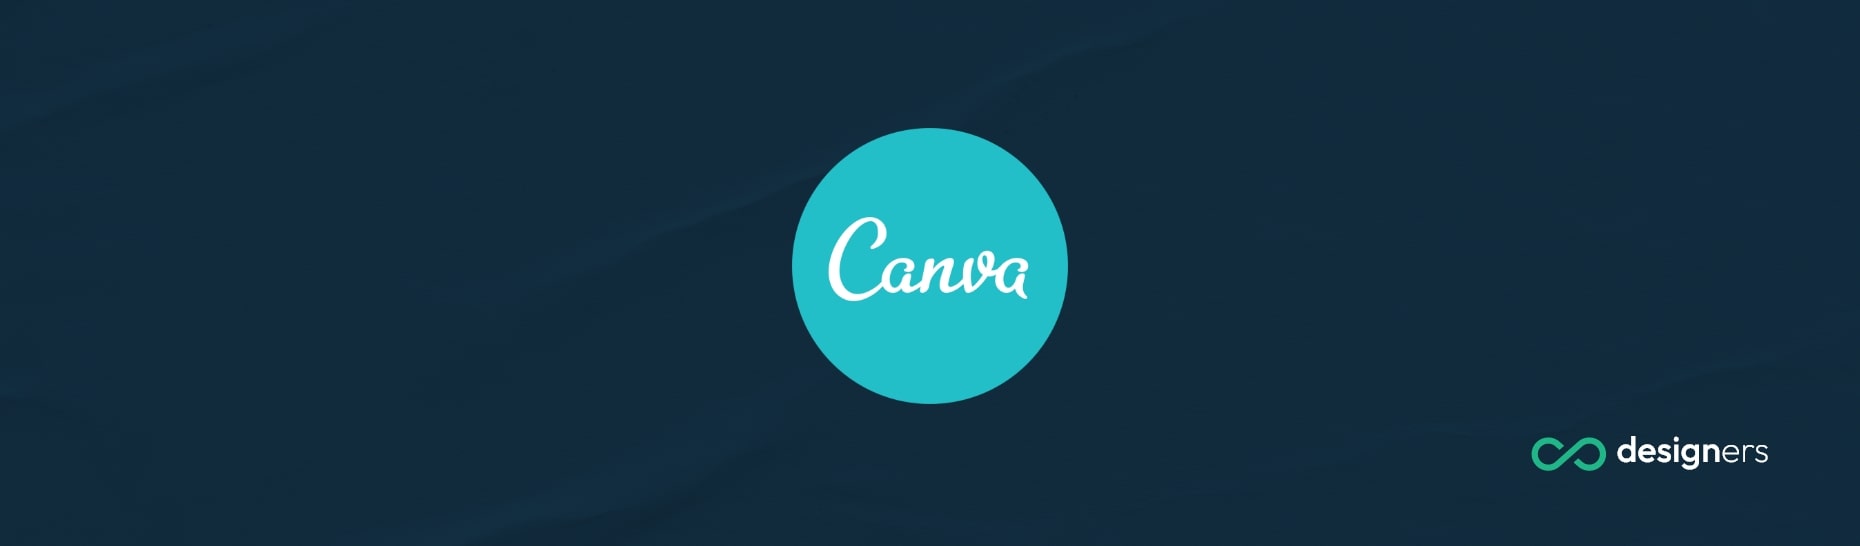 Does Canva Have Design Ideas?